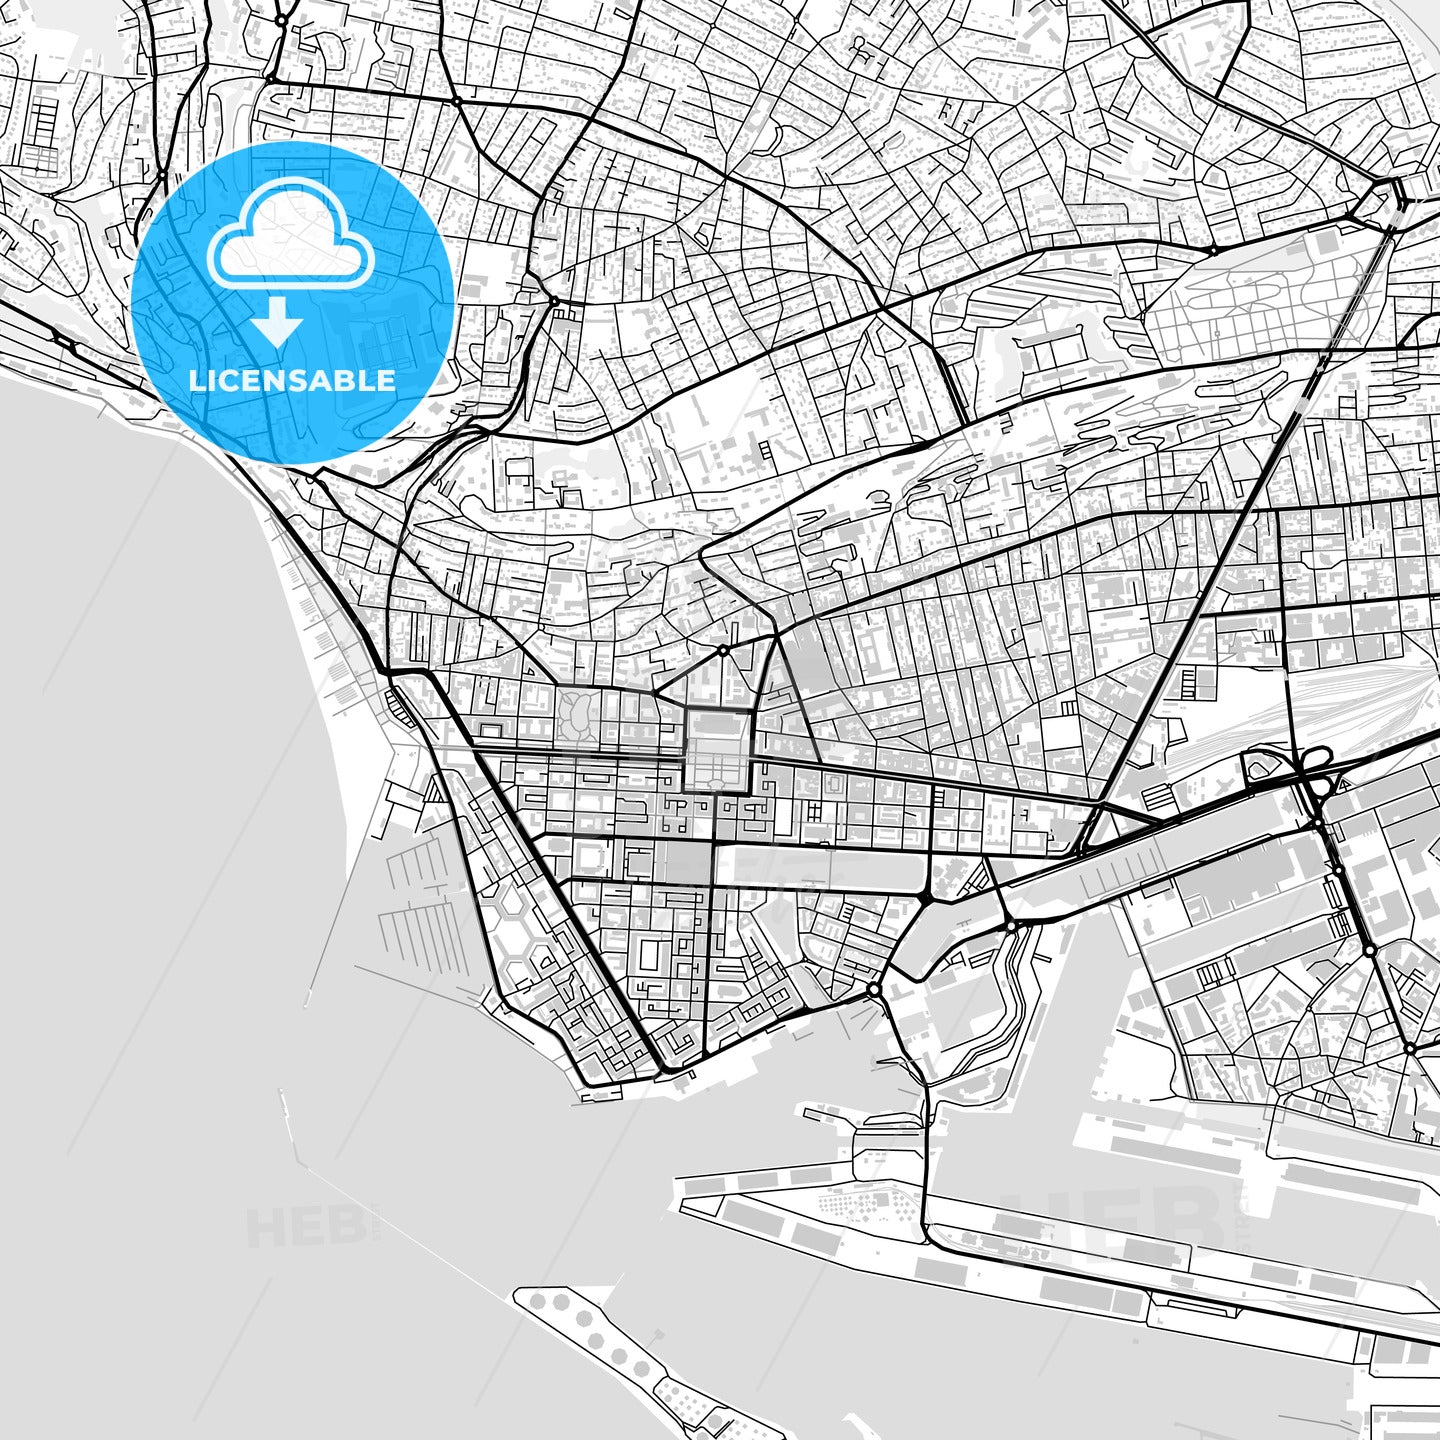 Downtown map of Le Havre, light